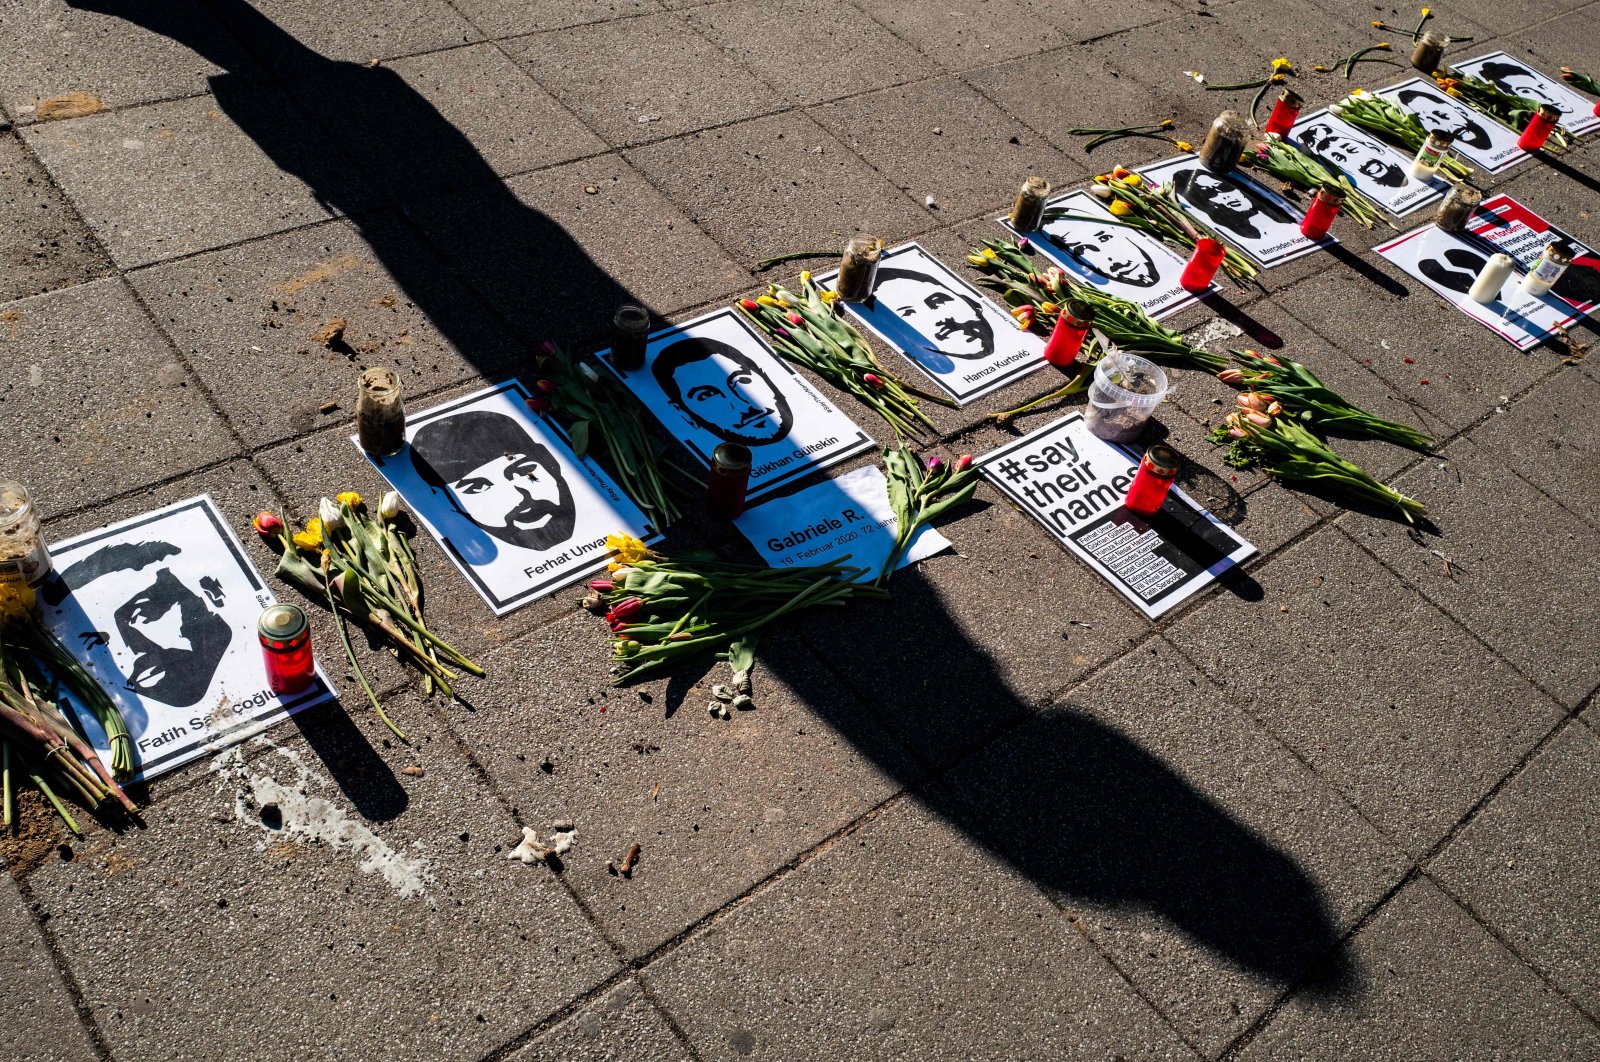 A passer-by casts a shadow on a makeshift memorial commemorating the nine victims of the deadly 2020 Hanau terrorist attack in front of a shopping mall in Berlin, Germany, March 2, 2021. (AFP Photo)